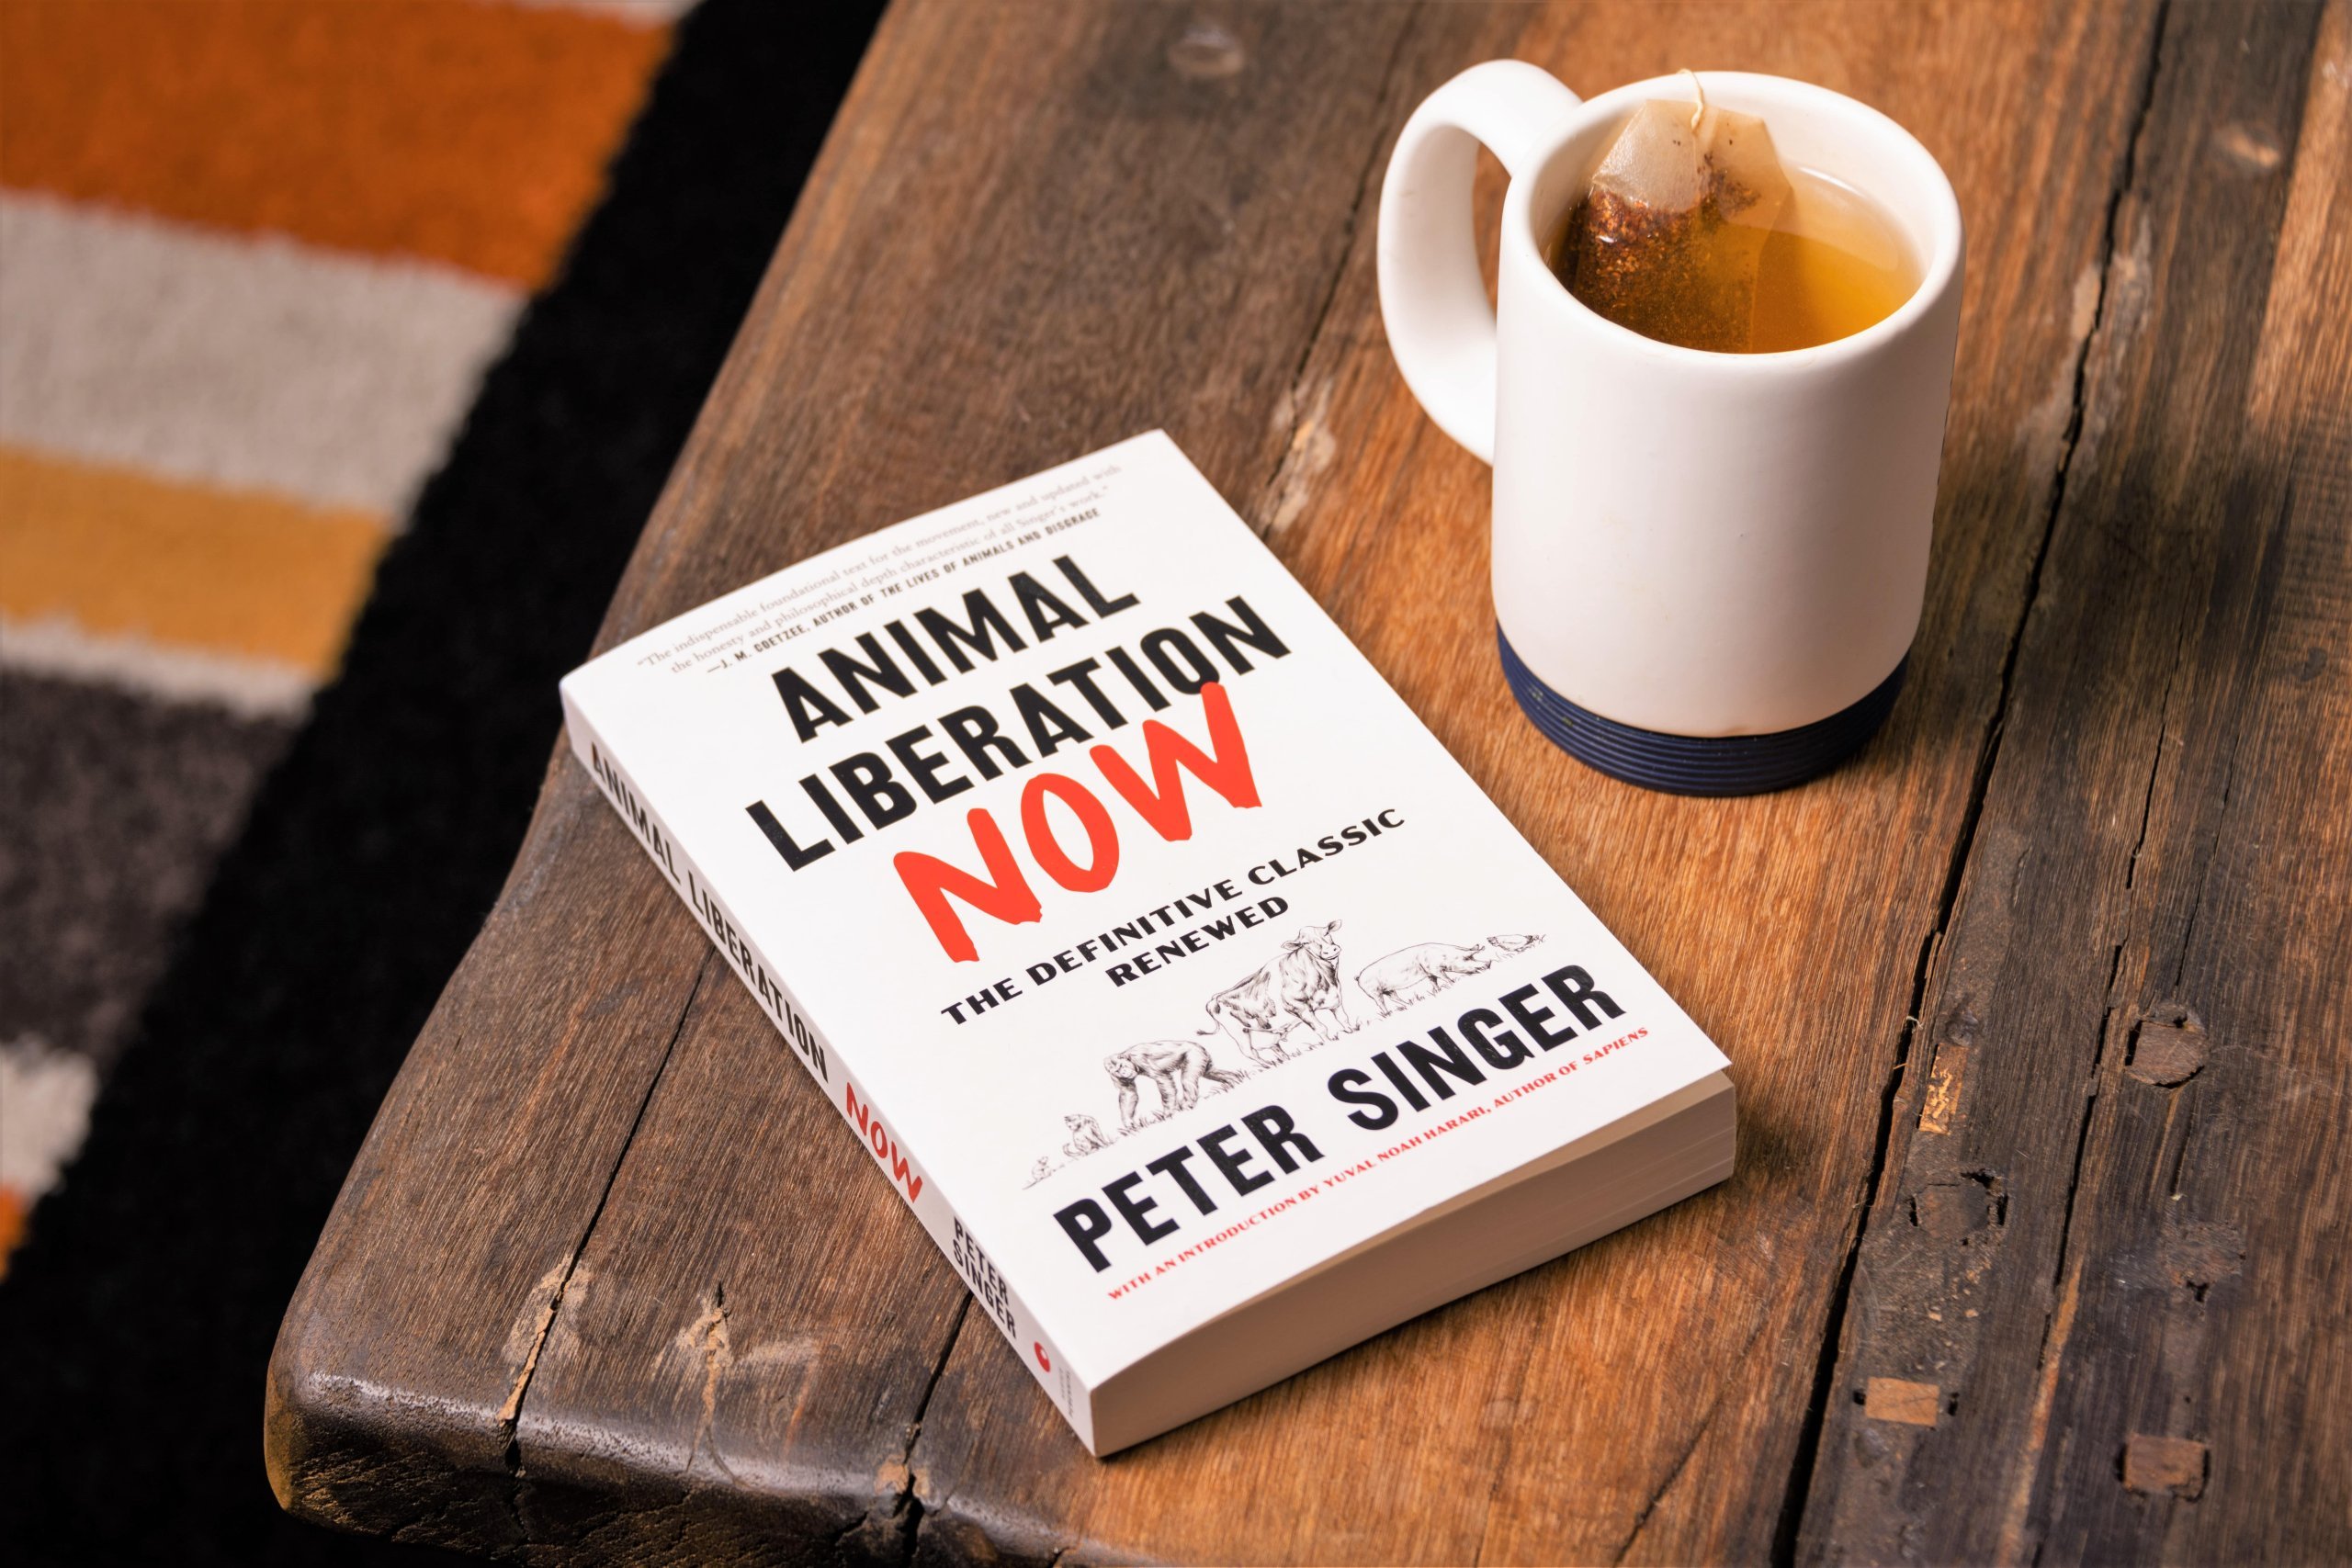 animal liberation now on table with tea